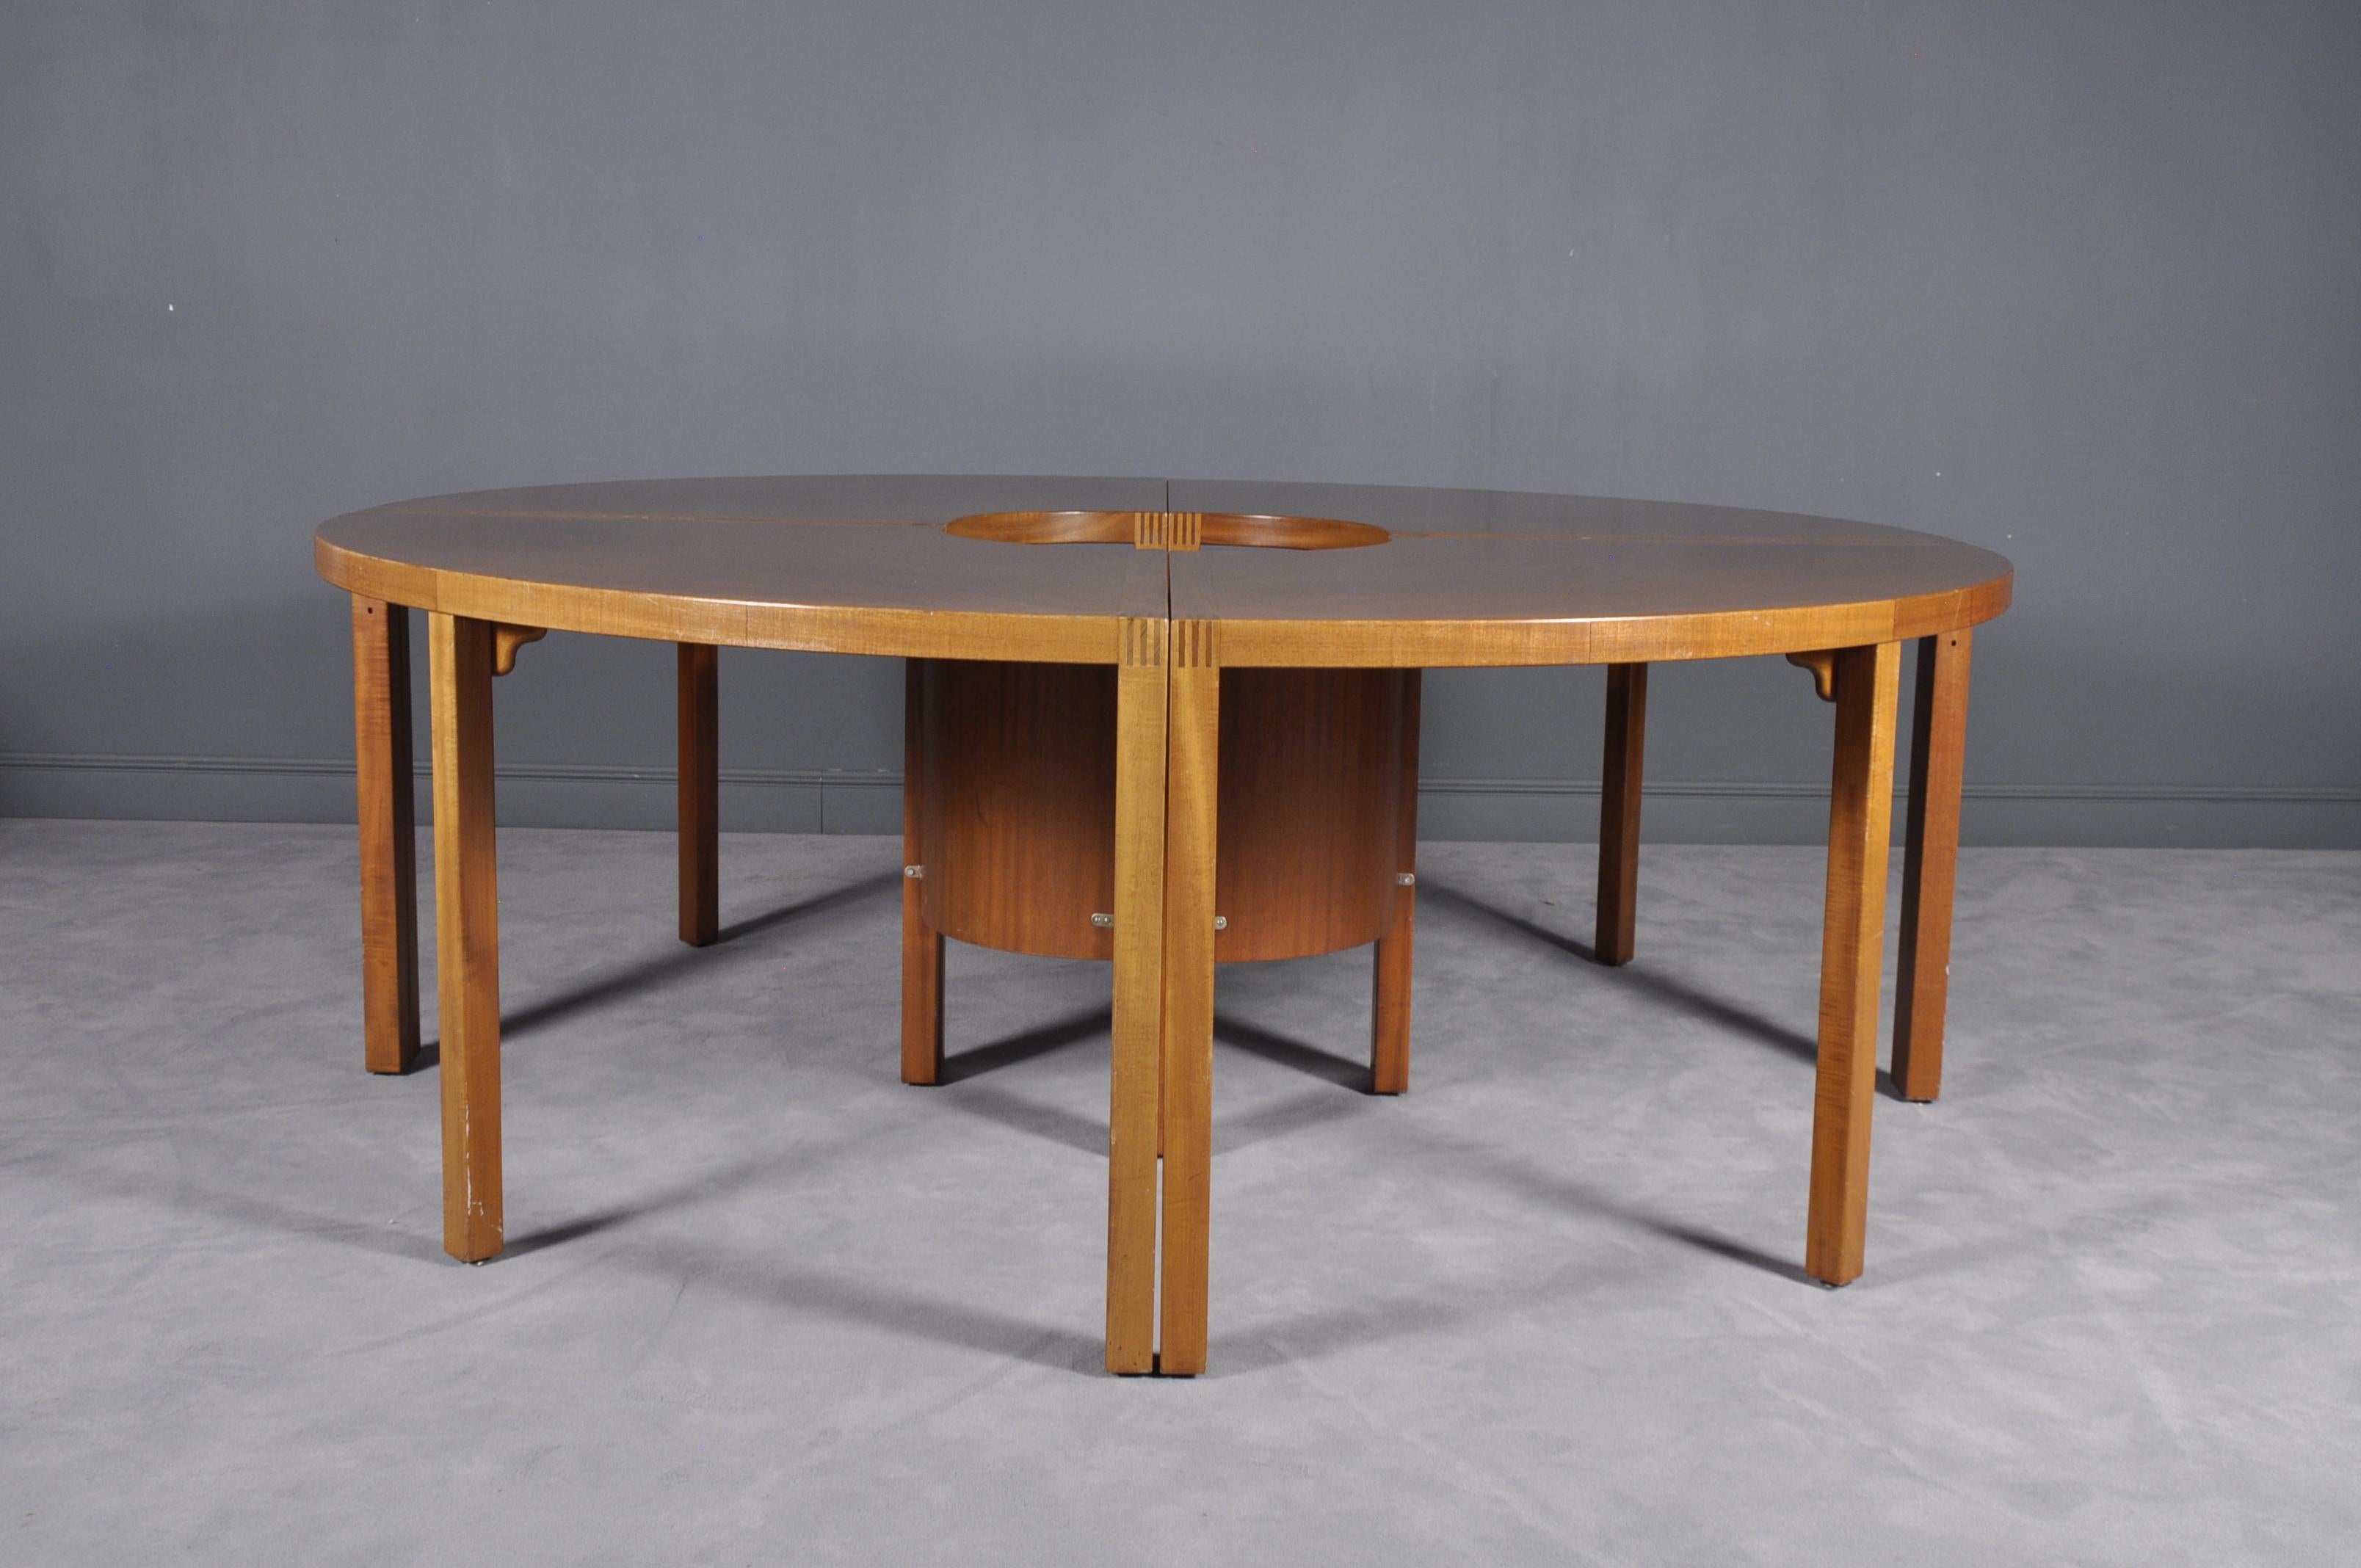 Leather Conference Table and Eight “Riksdagen” Chairs by Åke Axelsson for Gärsnäs, 1981 For Sale